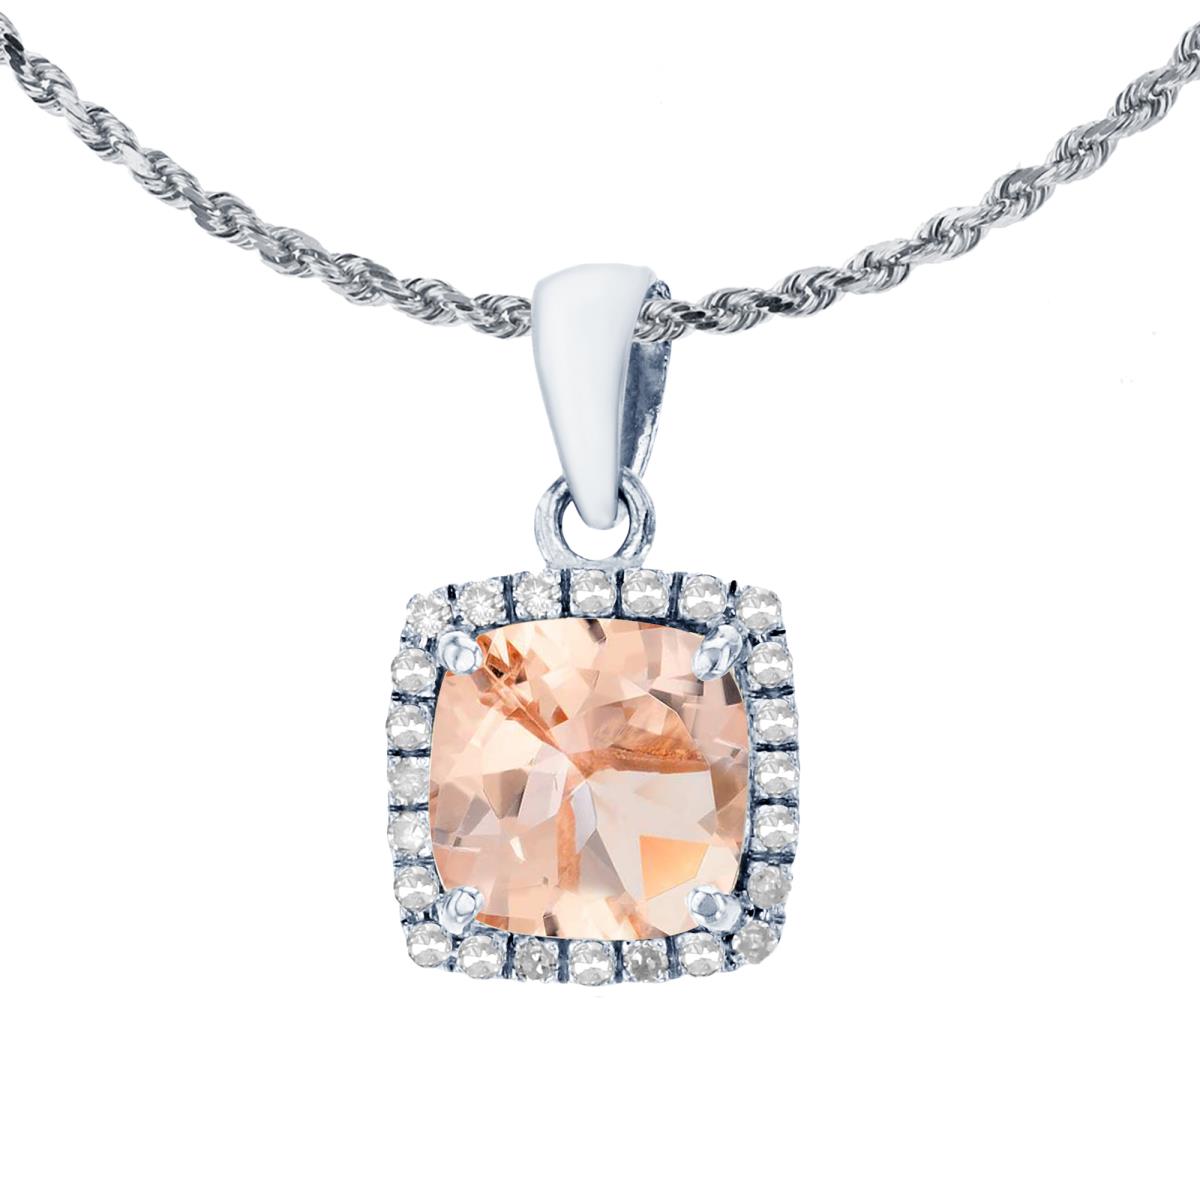 10K White Gold 7mm Cushion Morganite & 0.12 CTTW Diamond Halo 18" Rope Chain Necklace